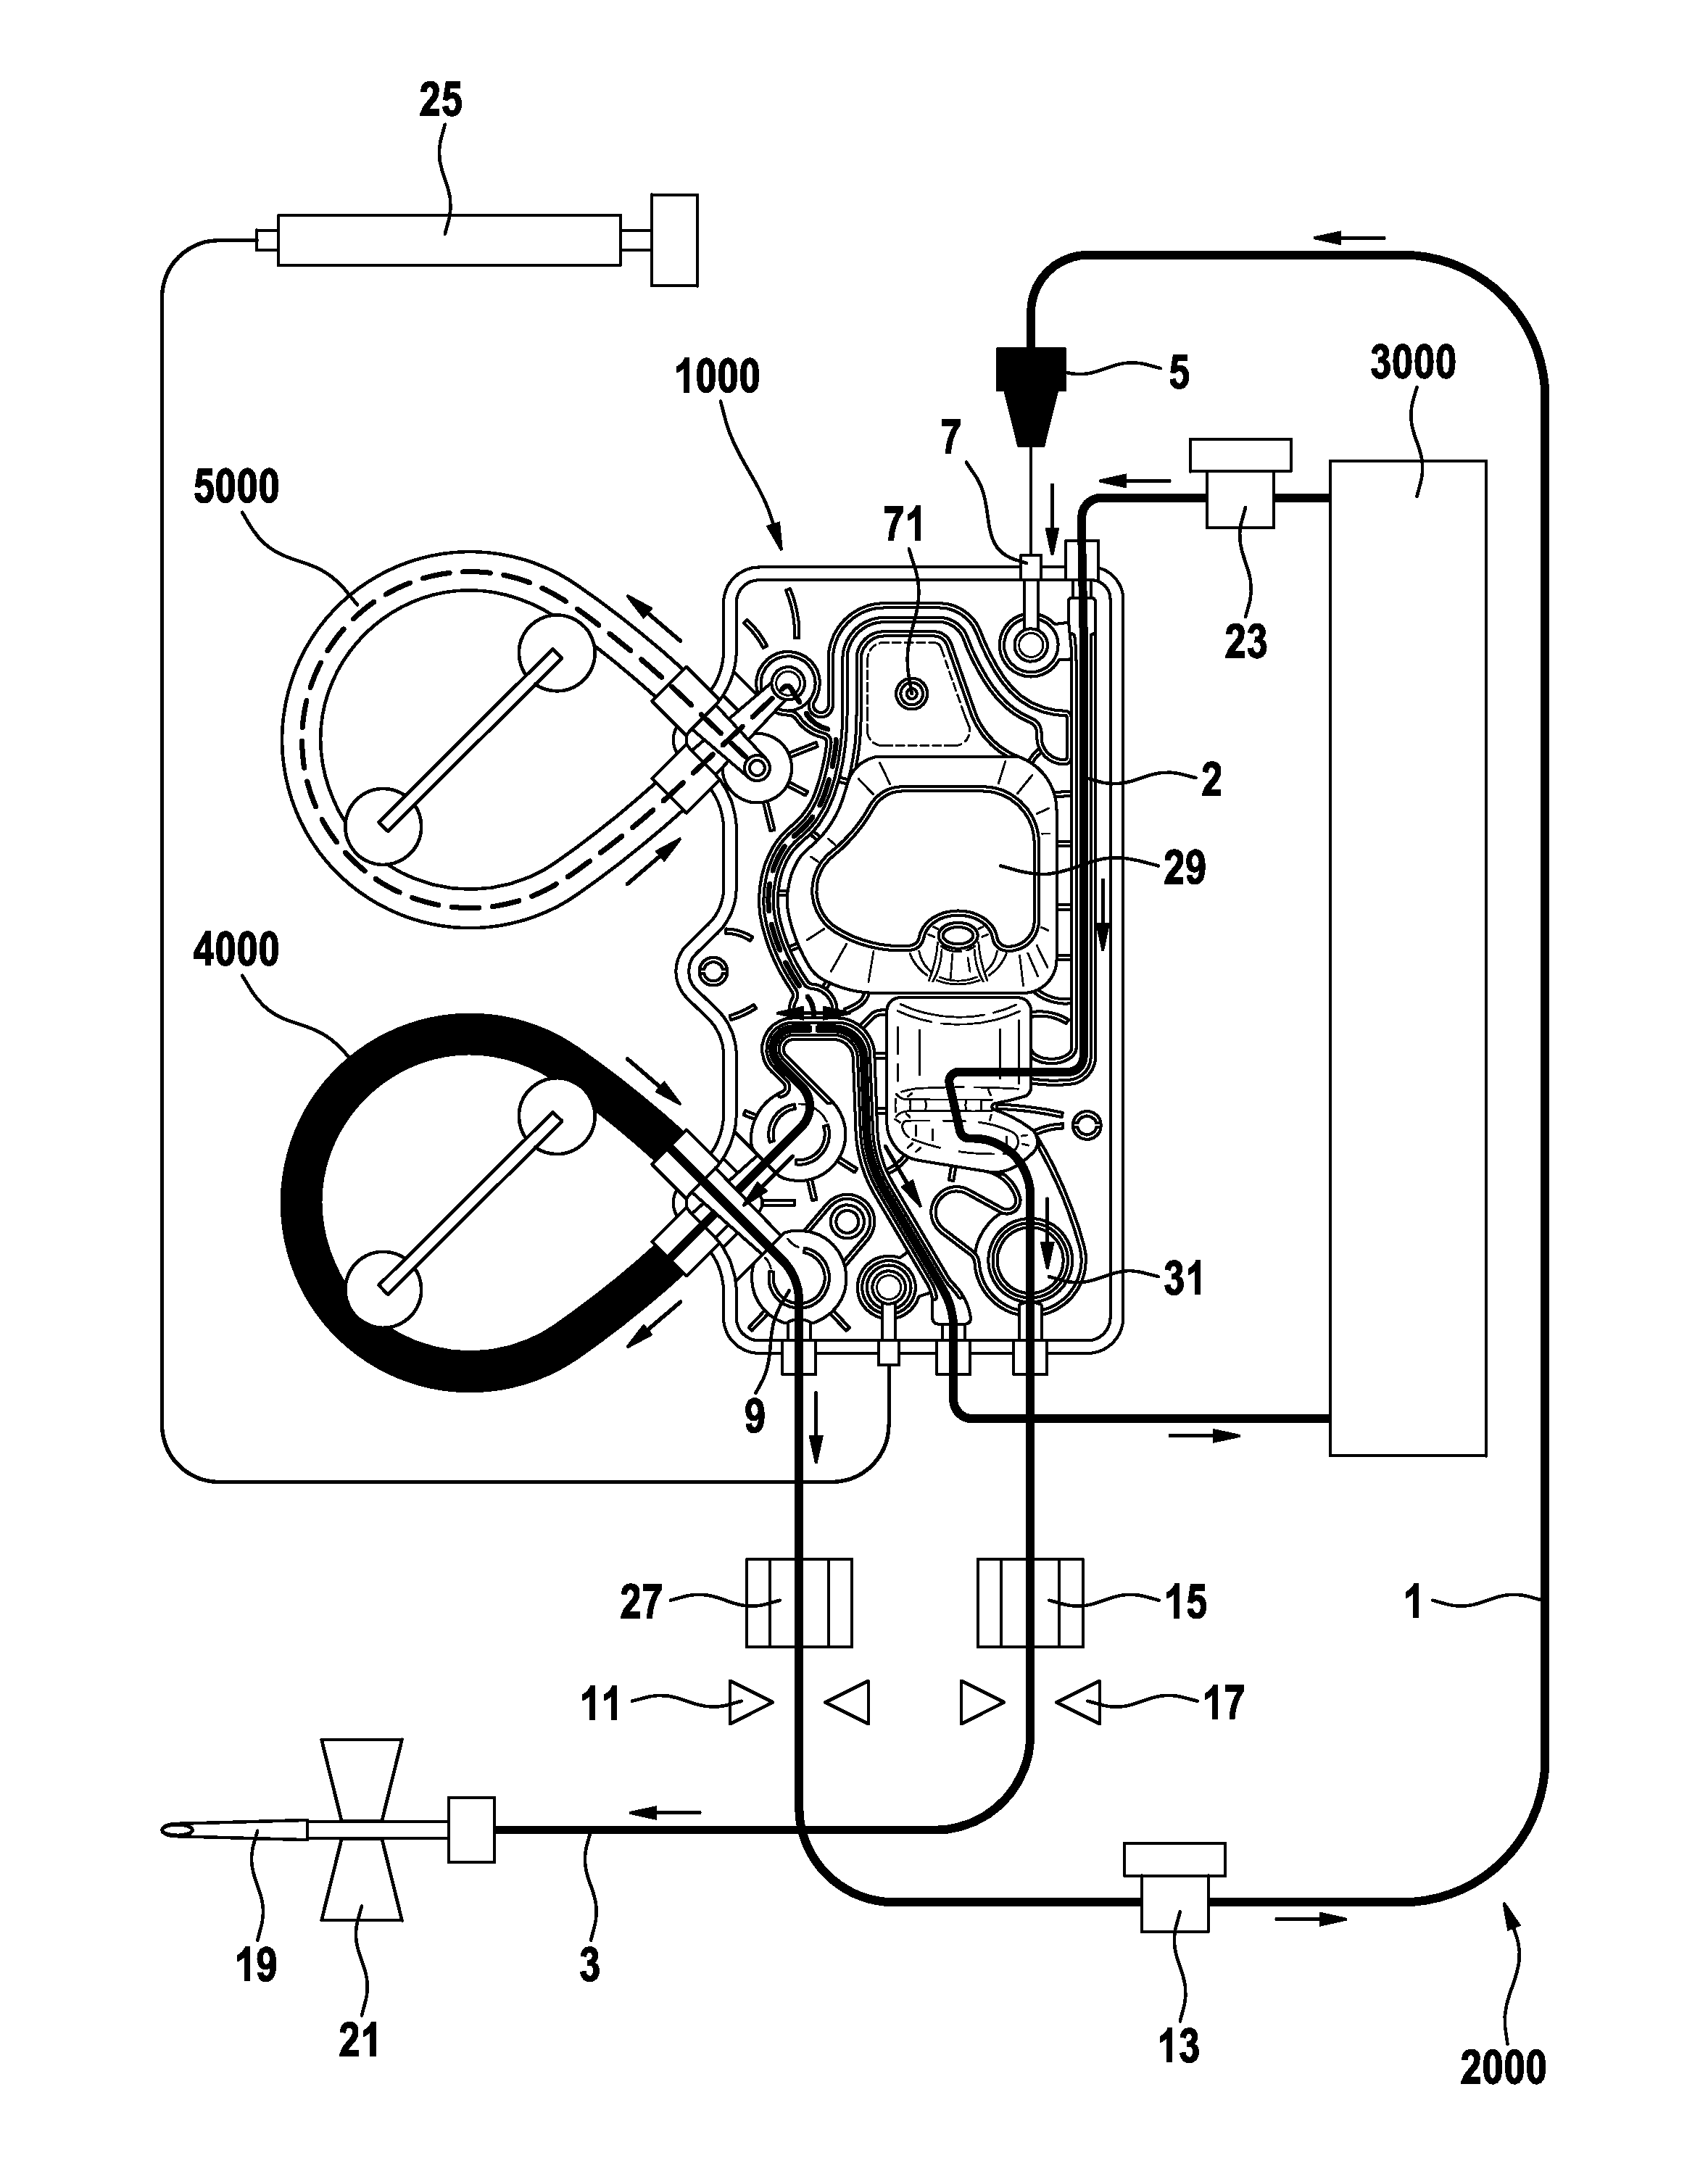 Method for removing blood from an extracorporeal blood circuit as well as apparatuses